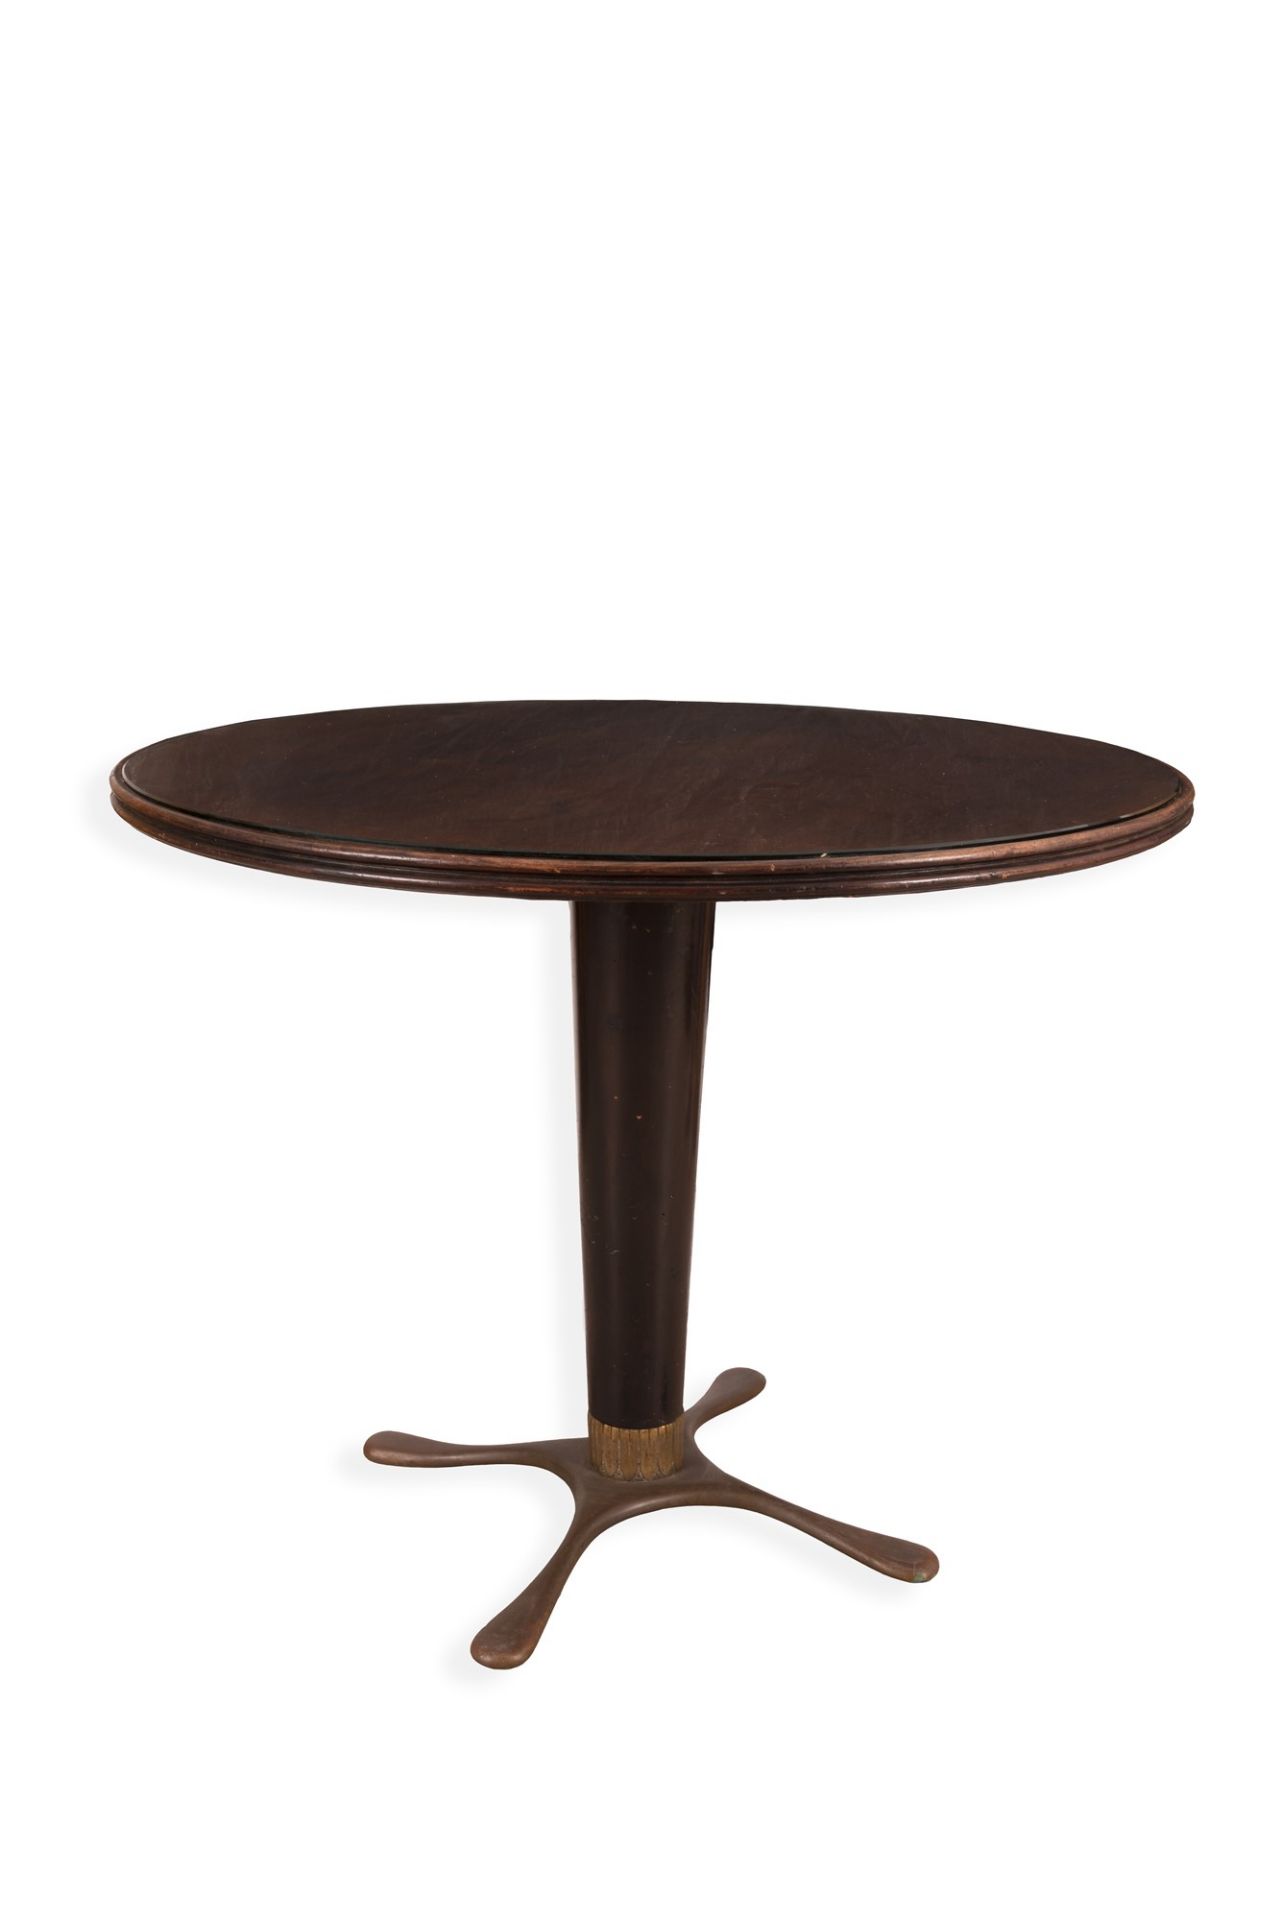 English Manufacture, 19th Century English Manufacture Round rosewood coffee table